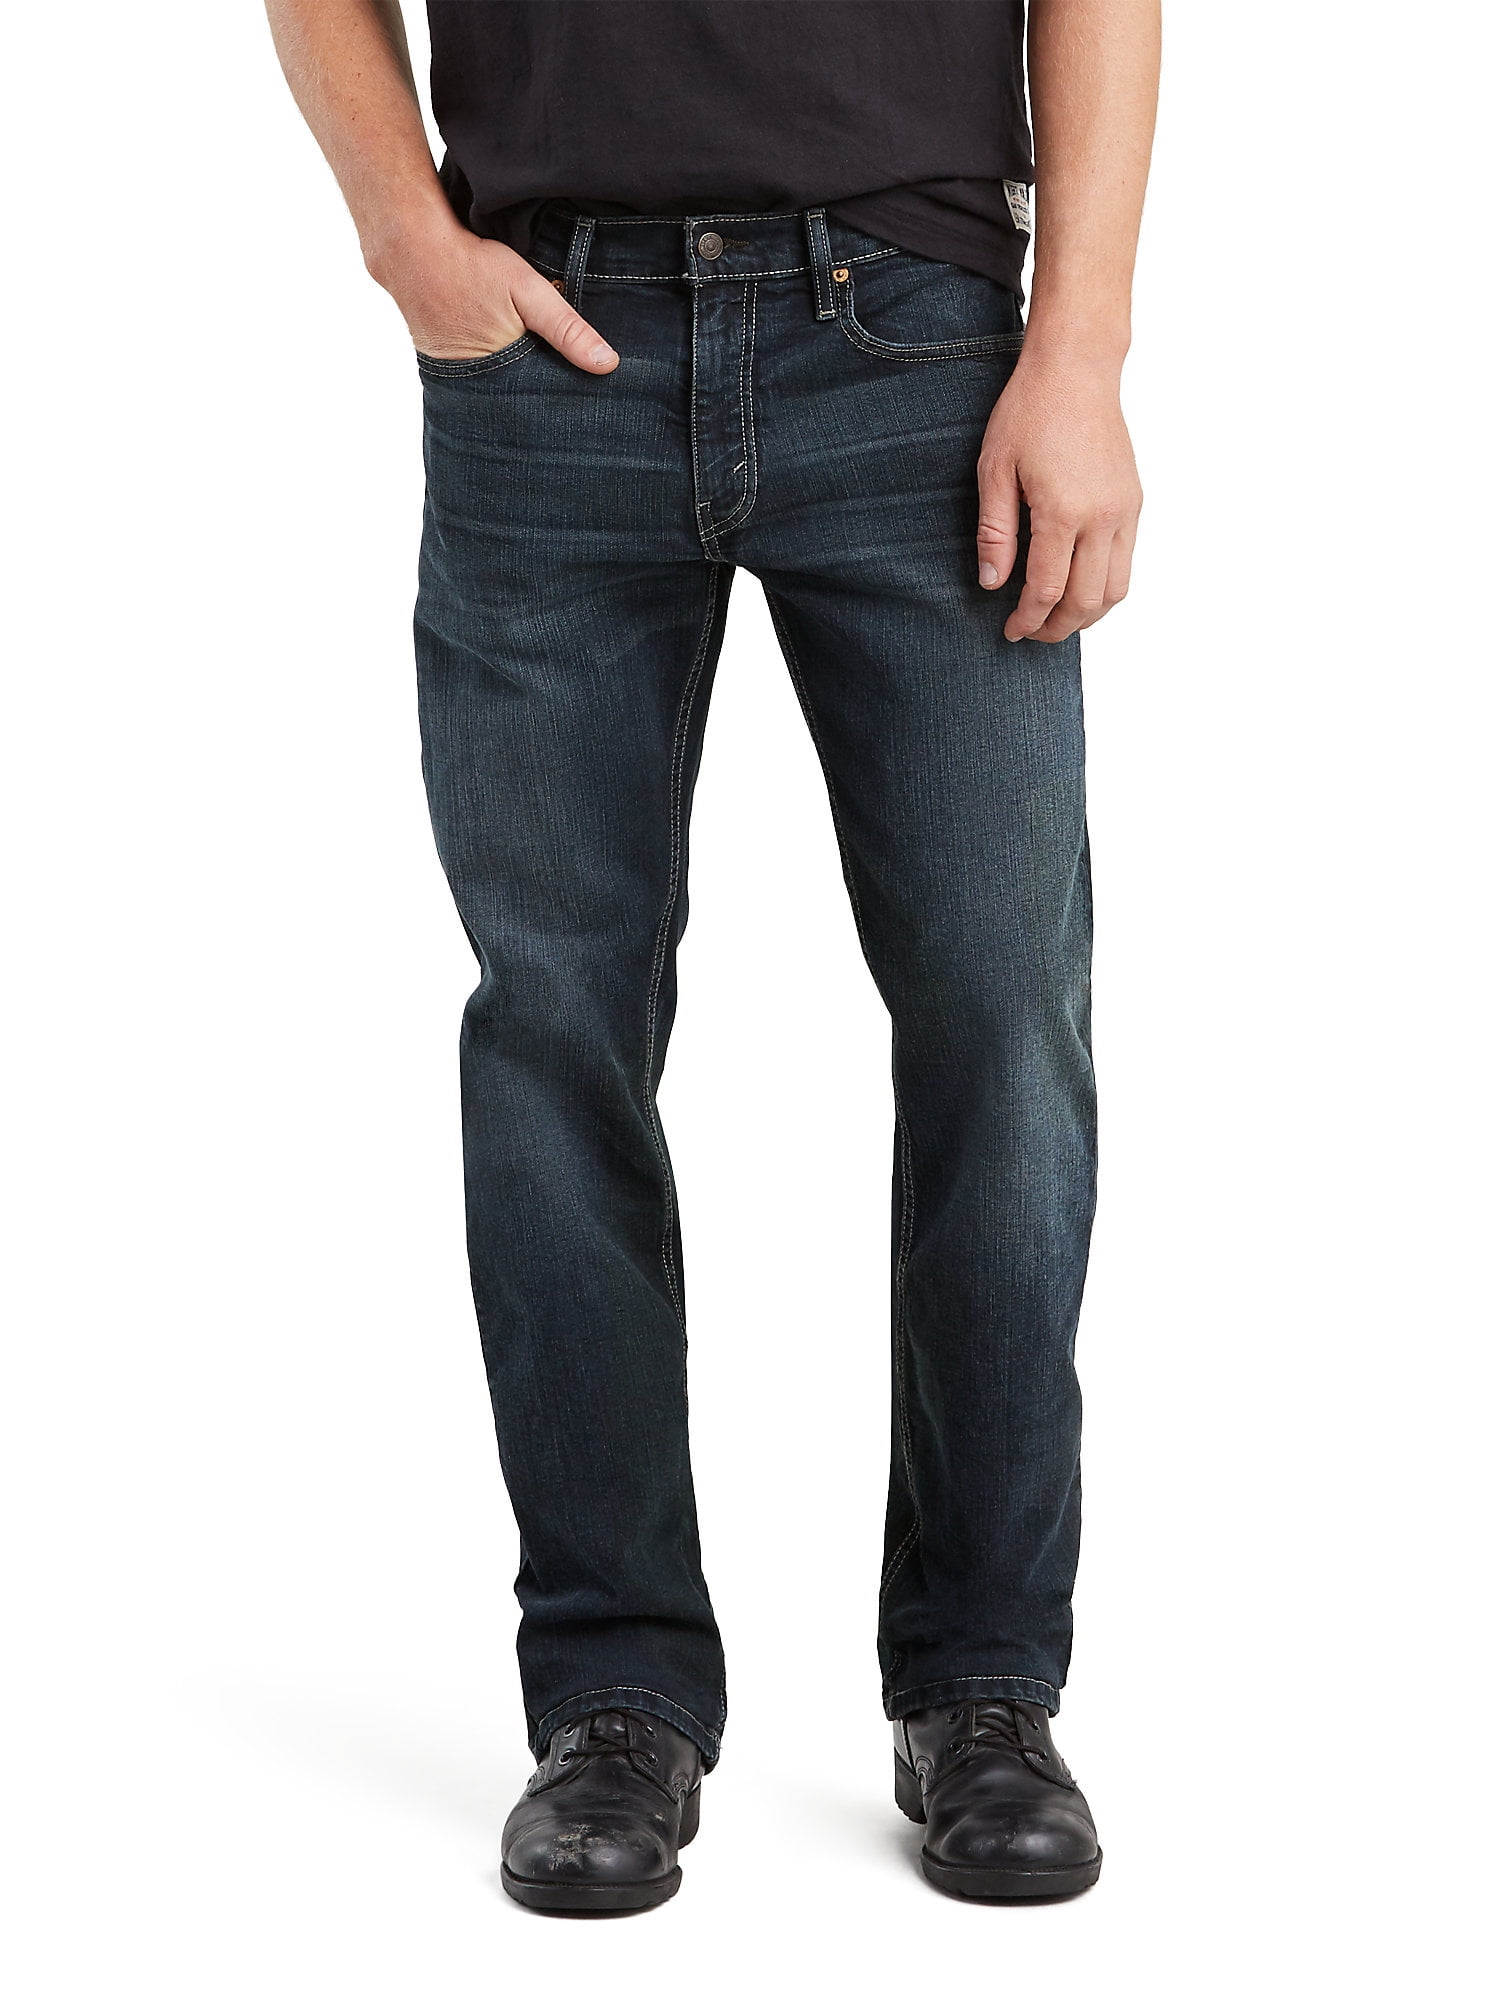 Levi's Men's Big & Tall 559 Relaxed Straight Jeans - Walmart.com